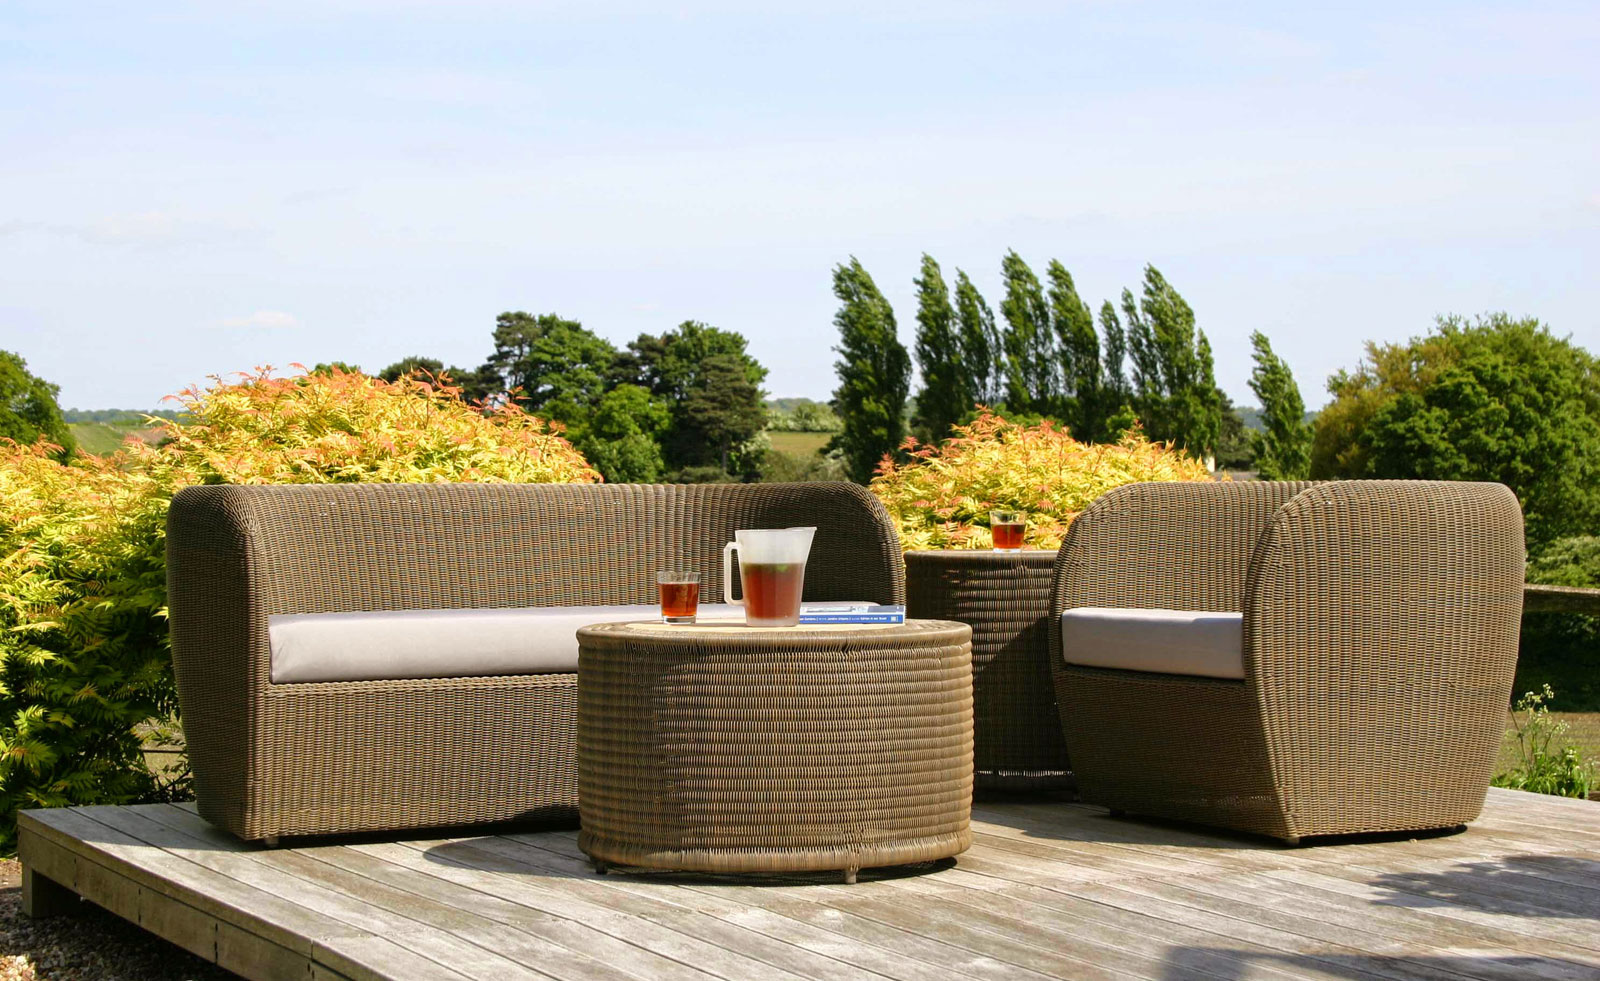 Outdoor Furniture Wicker Contemporary Outdoor Furniture Design With Wicker Sofa And Round Coffee Table Decorated With Wooden Deck Flooring Furniture Contemporary Outdoor Furniture As A Companion To Nature